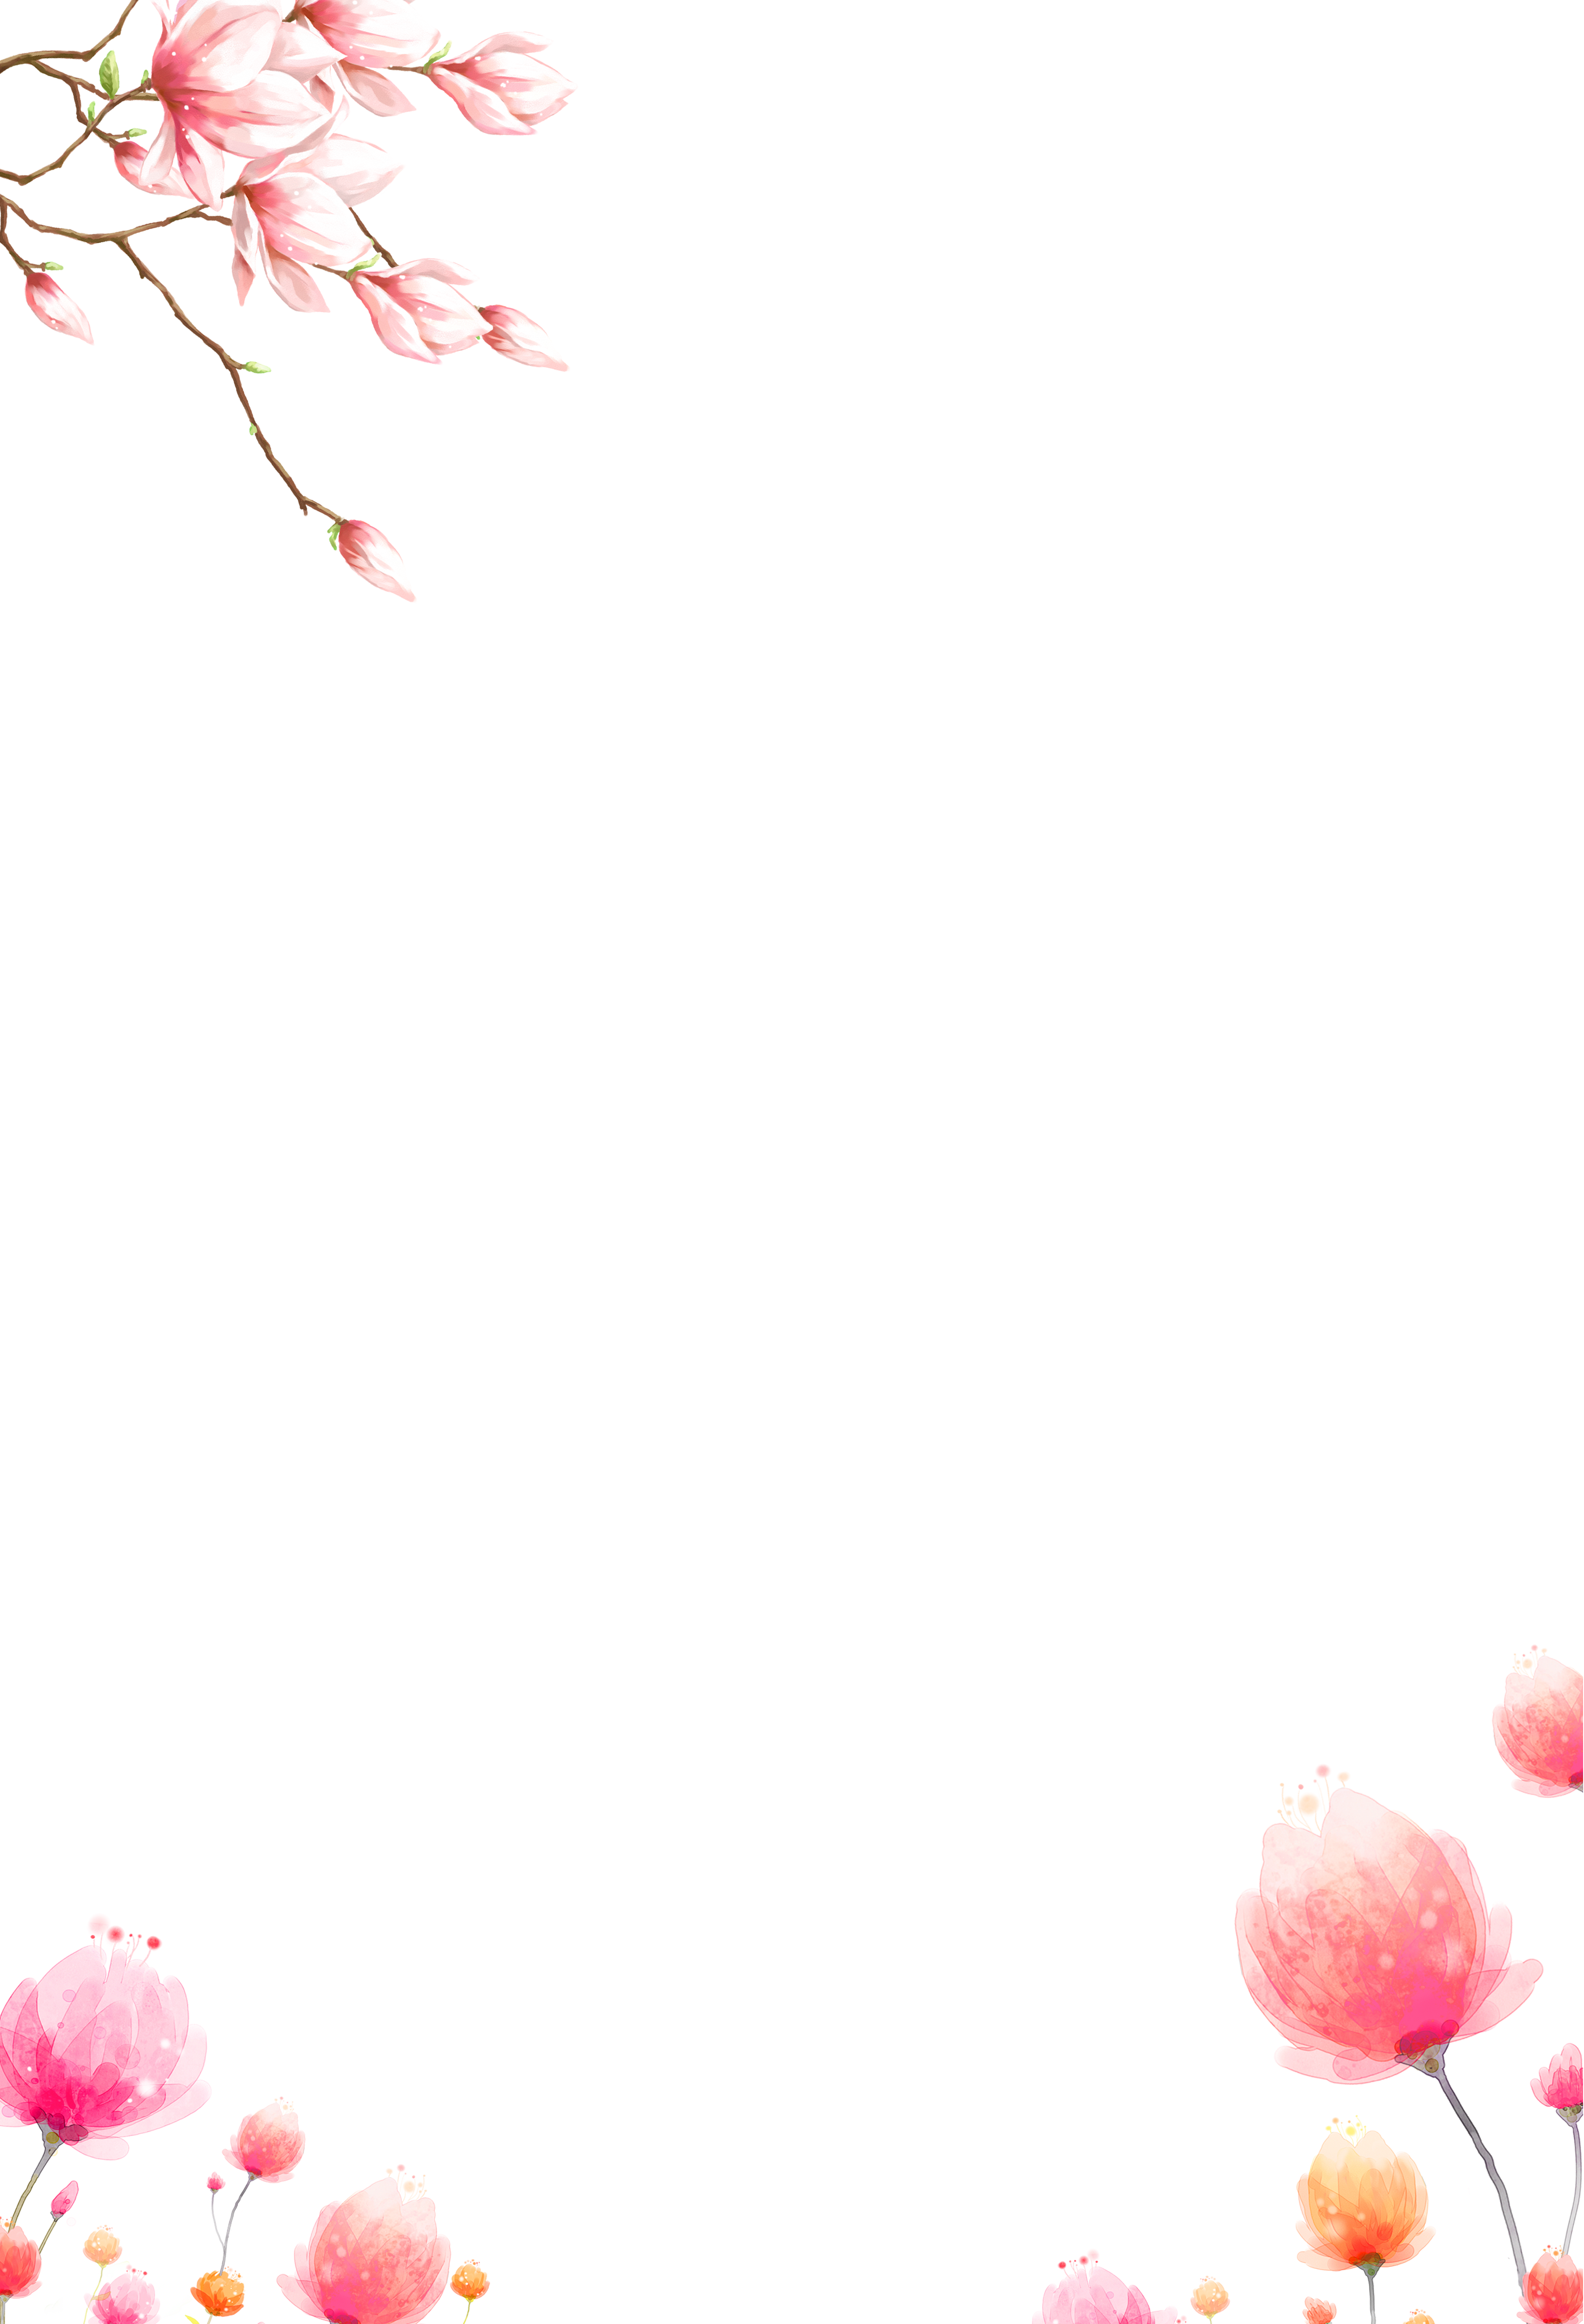 Pink Beautiful Flowers Border Free Transparent Image HD Clipart